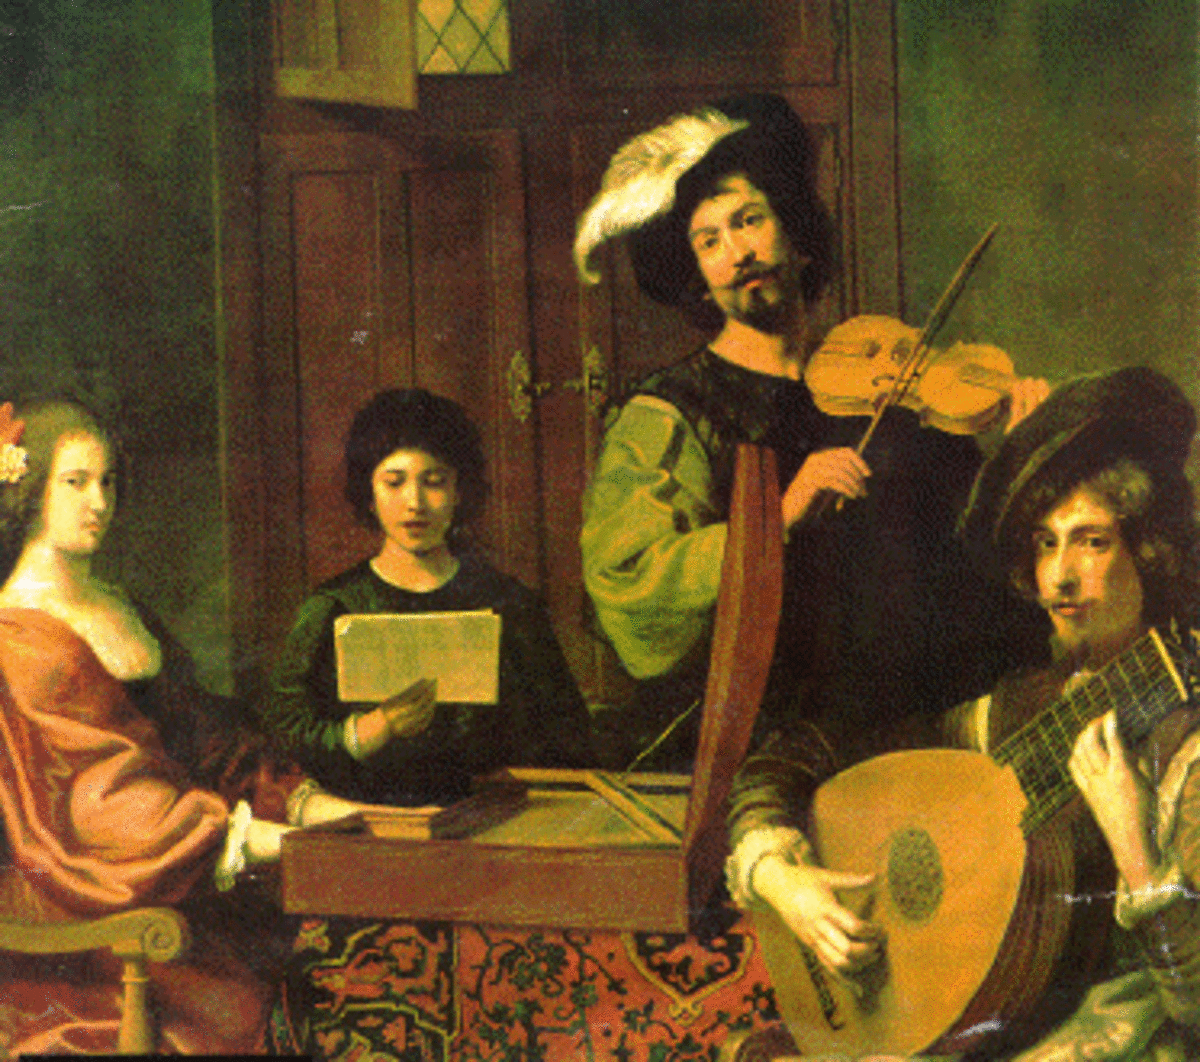 Music was central to the Renaissance Era